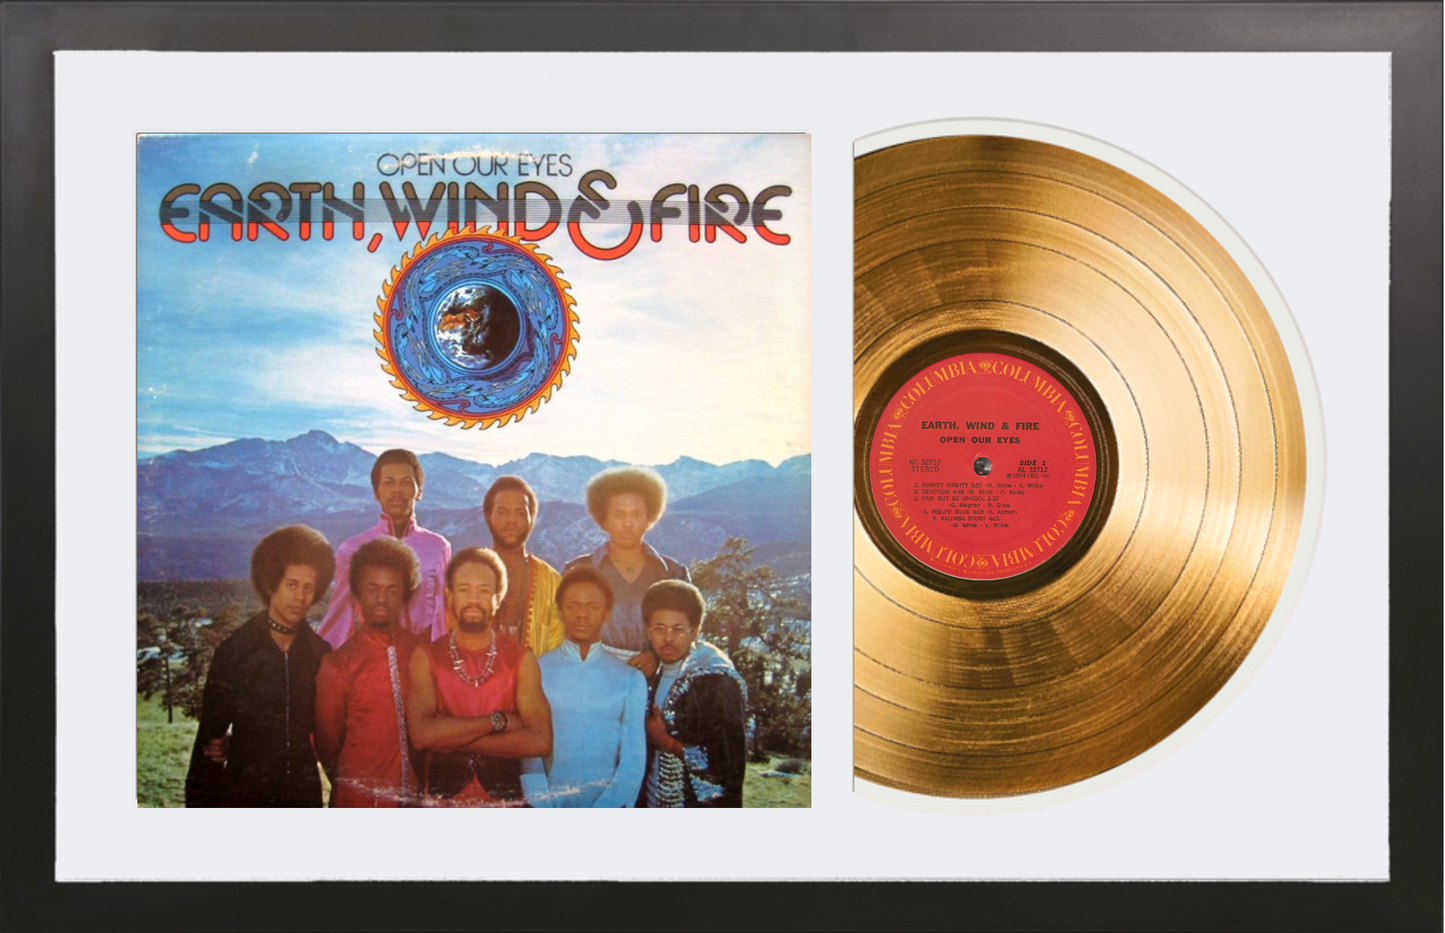 Earth, Wind & Fire - Open Our Eyes - 14K Gold Plated Vinyl